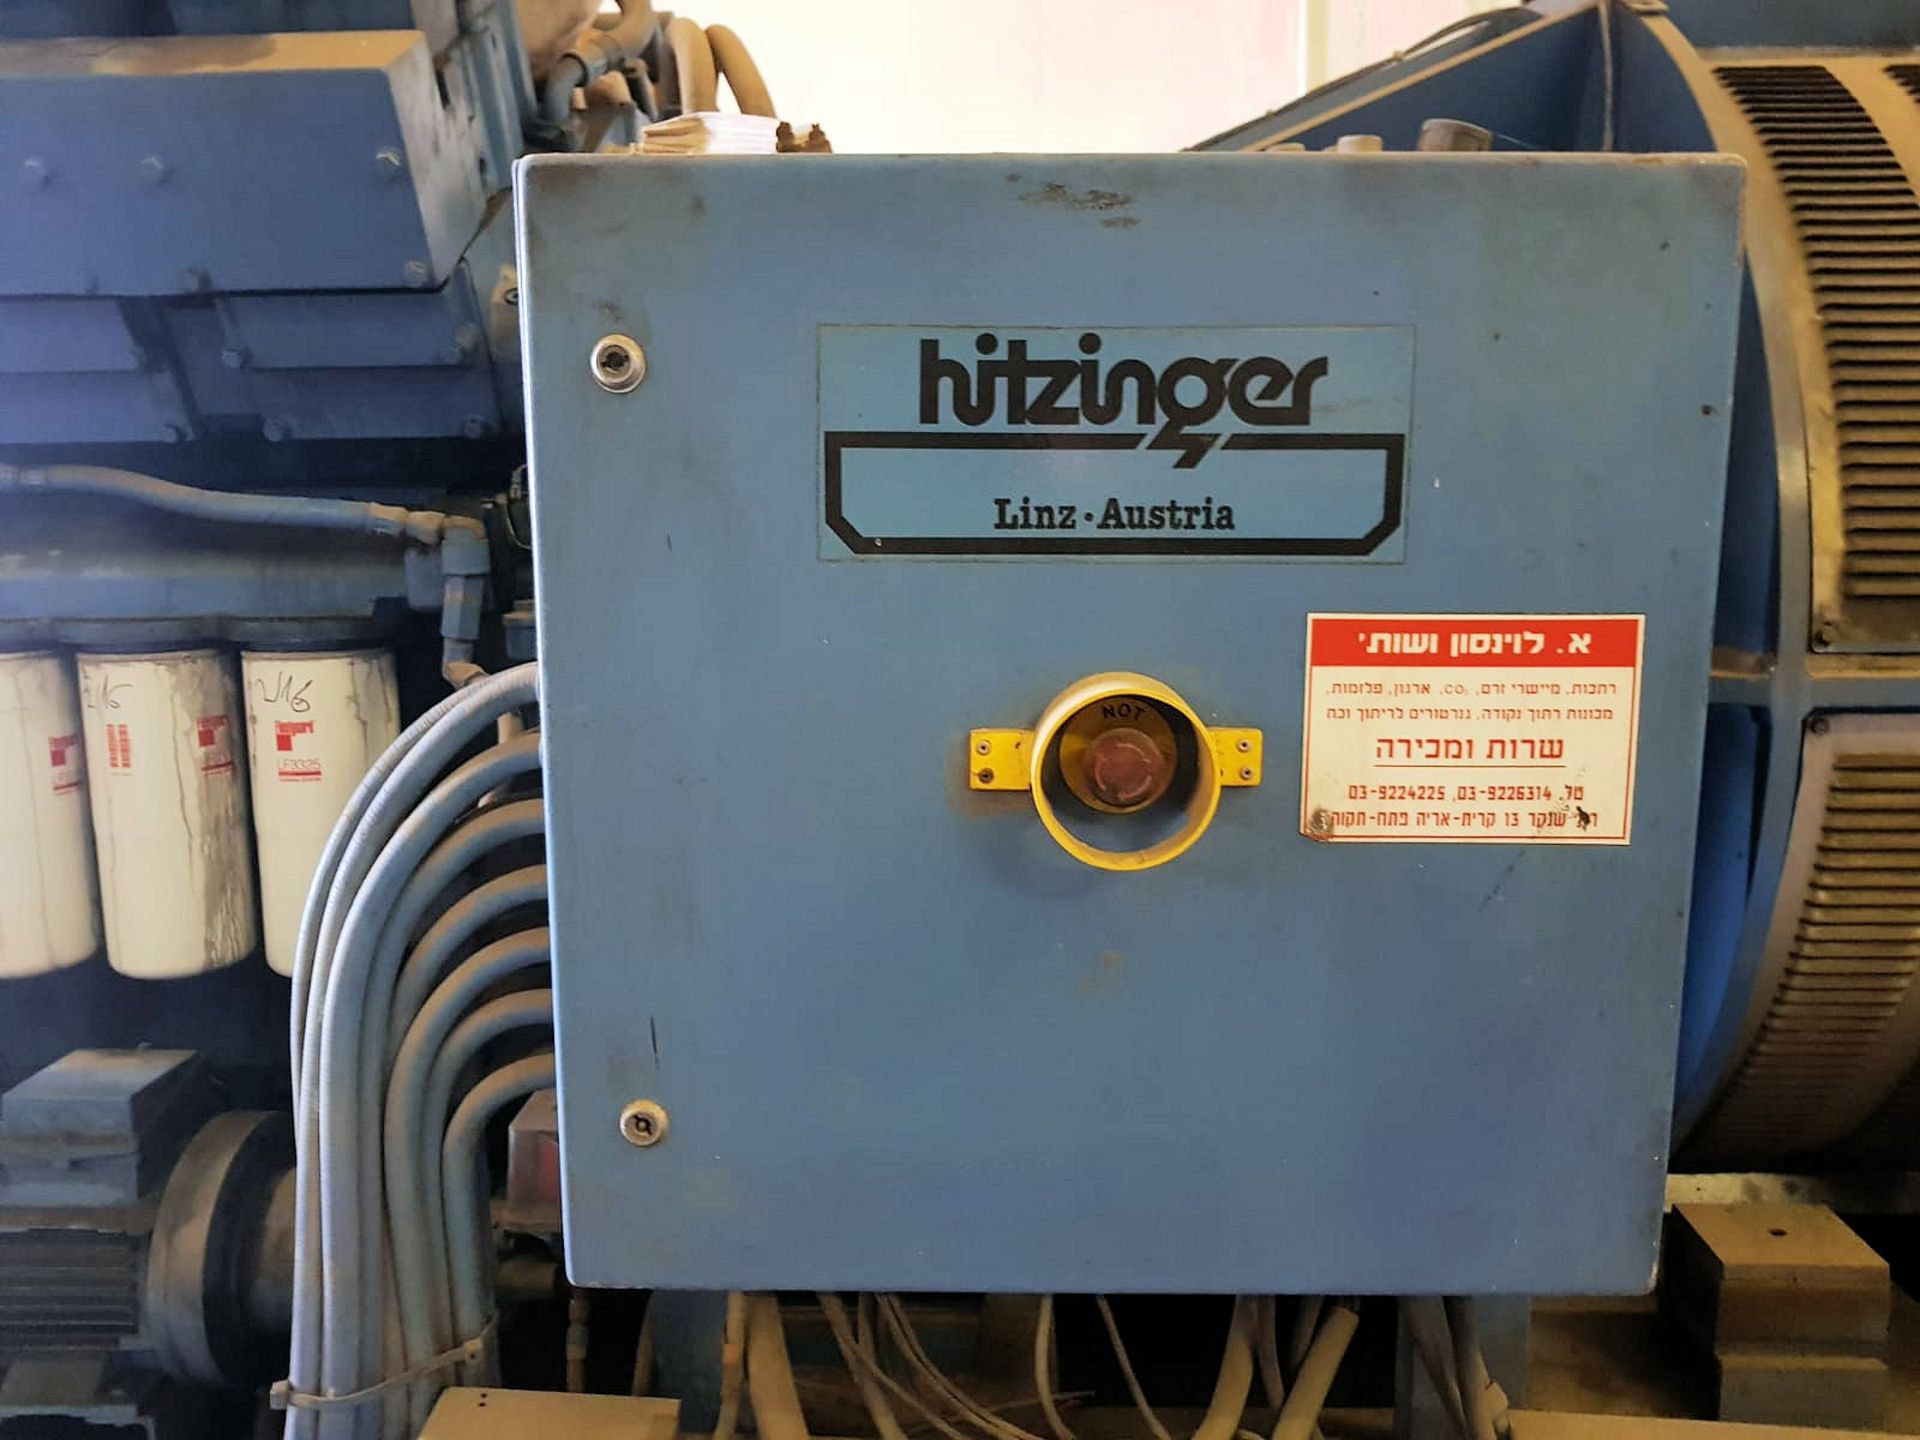 1 x 1987 Hitzinger SGS 9D 040 Generator - Only 800 Hours Use - Ref: T4UB/HZ - CL333 - Location: - Image 10 of 20